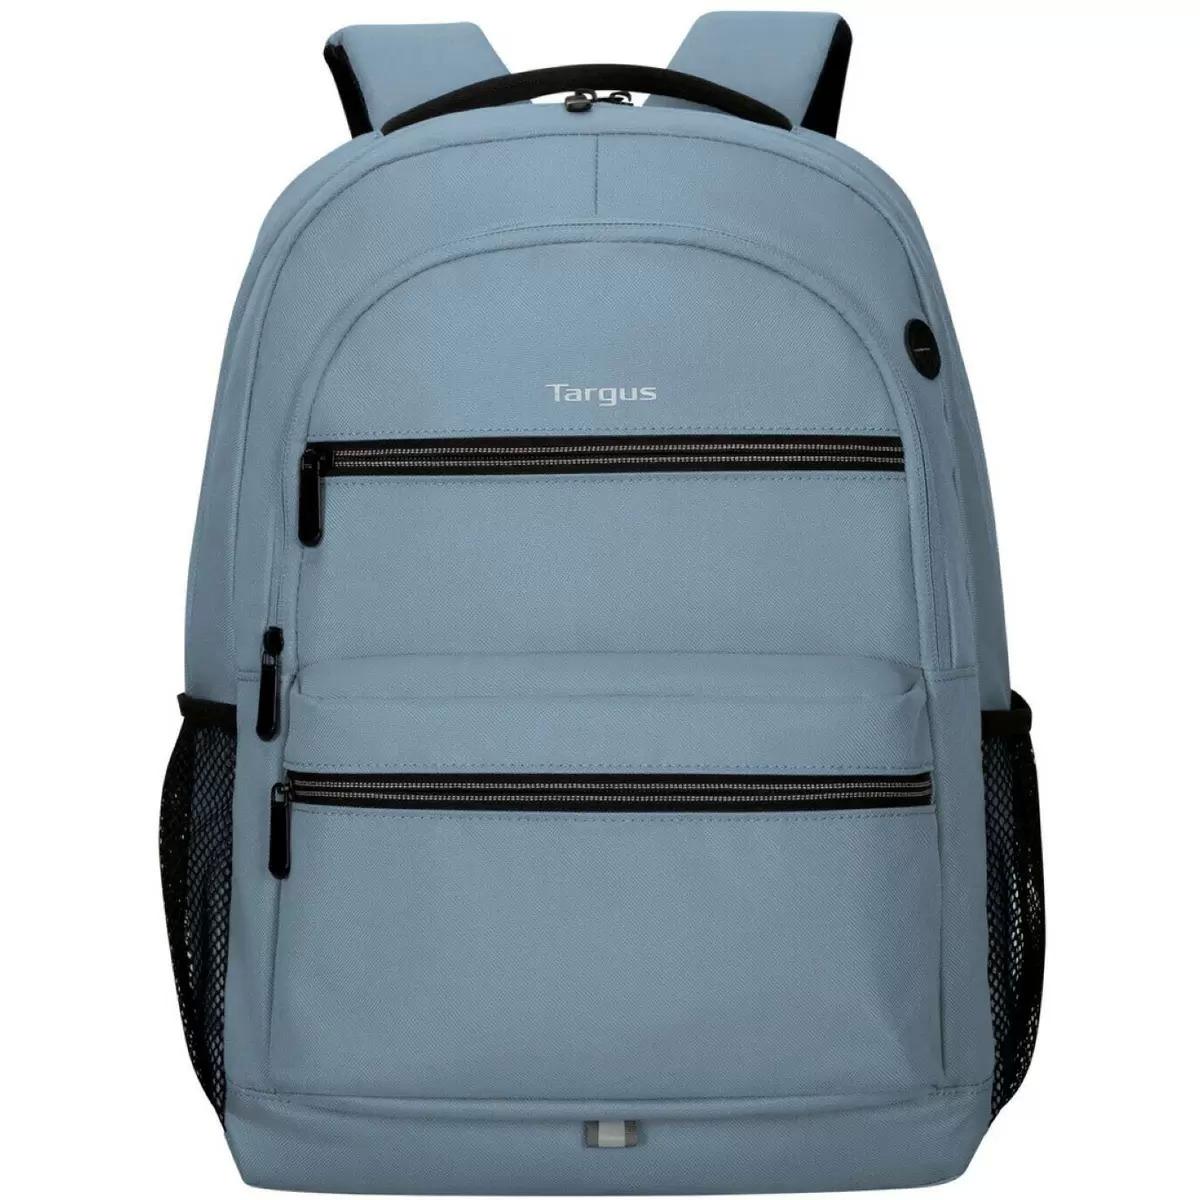 Targus Octave 15.6in Laptop Backpack for $11.99 Shipped